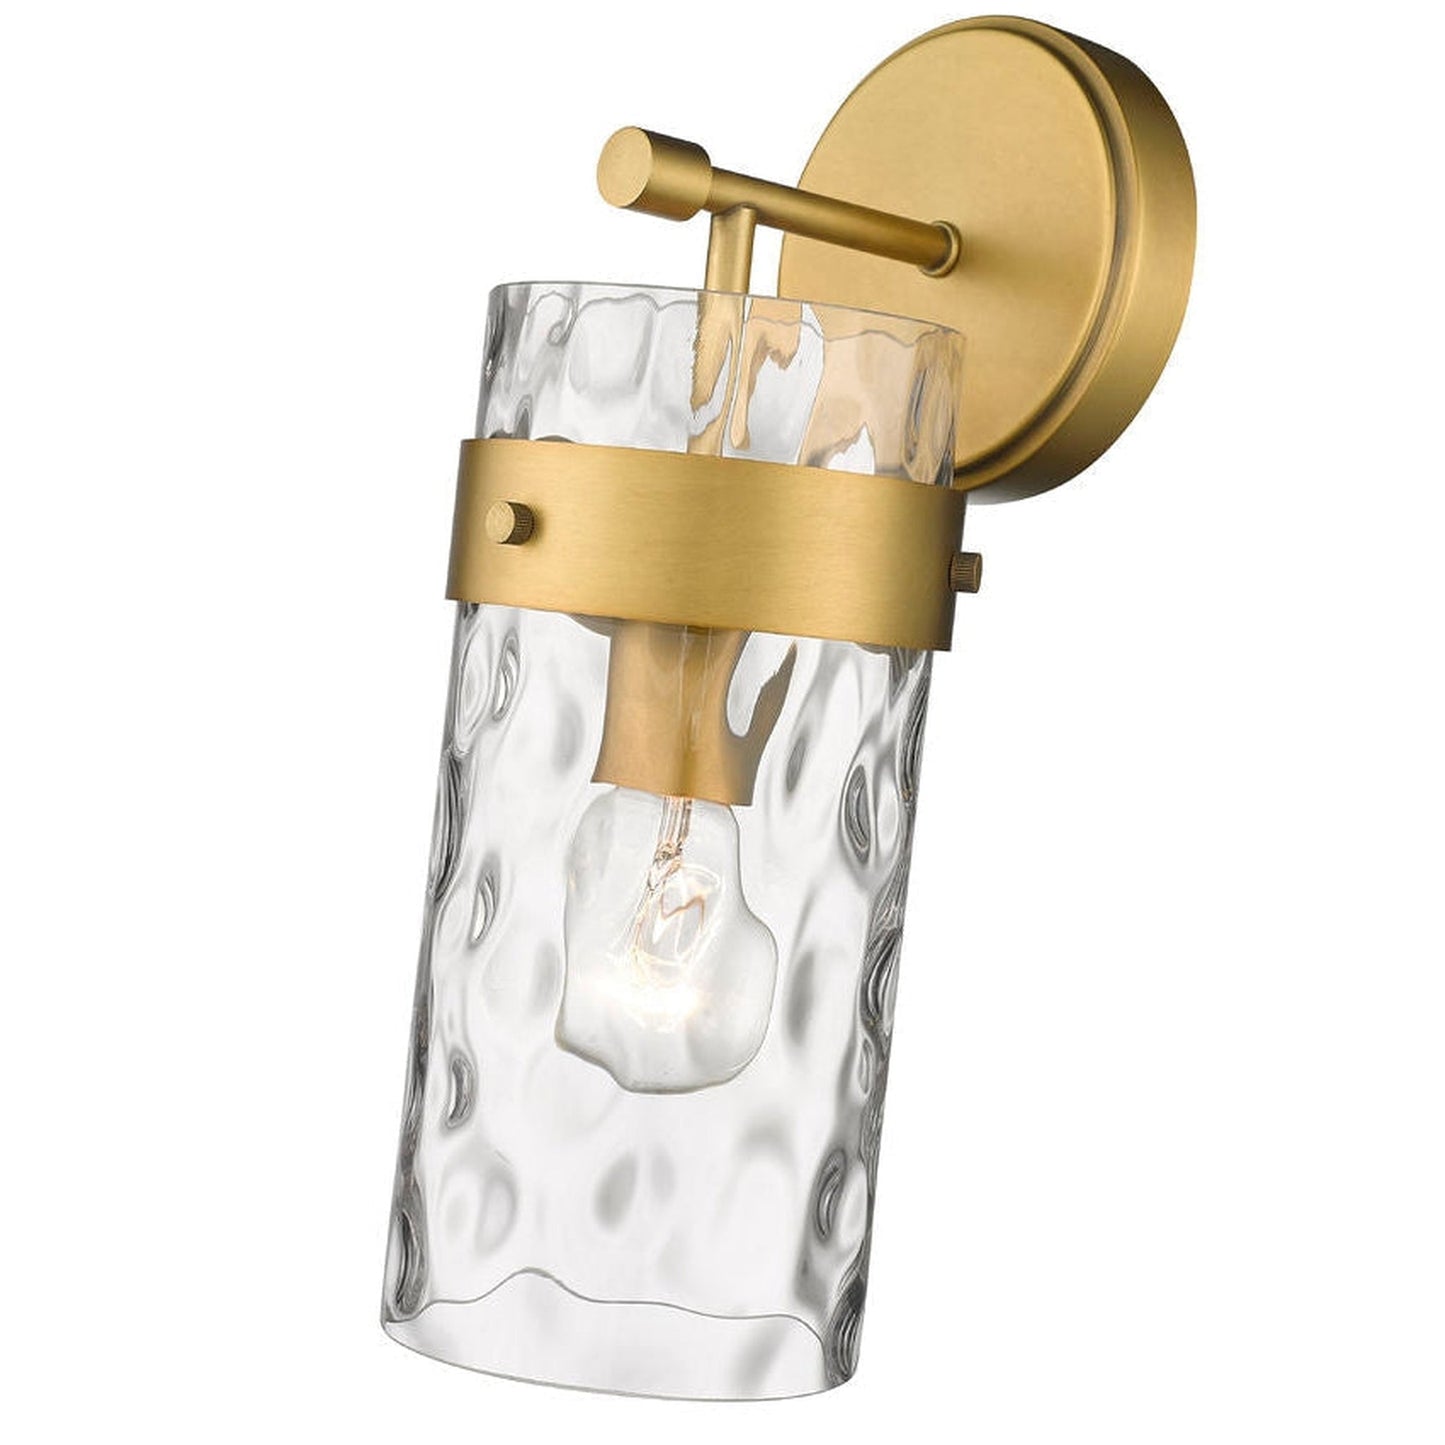 Z-Lite Fontaine 6" 1-Light Rubbed Brass Wall Sconce With Clear Glass Shade